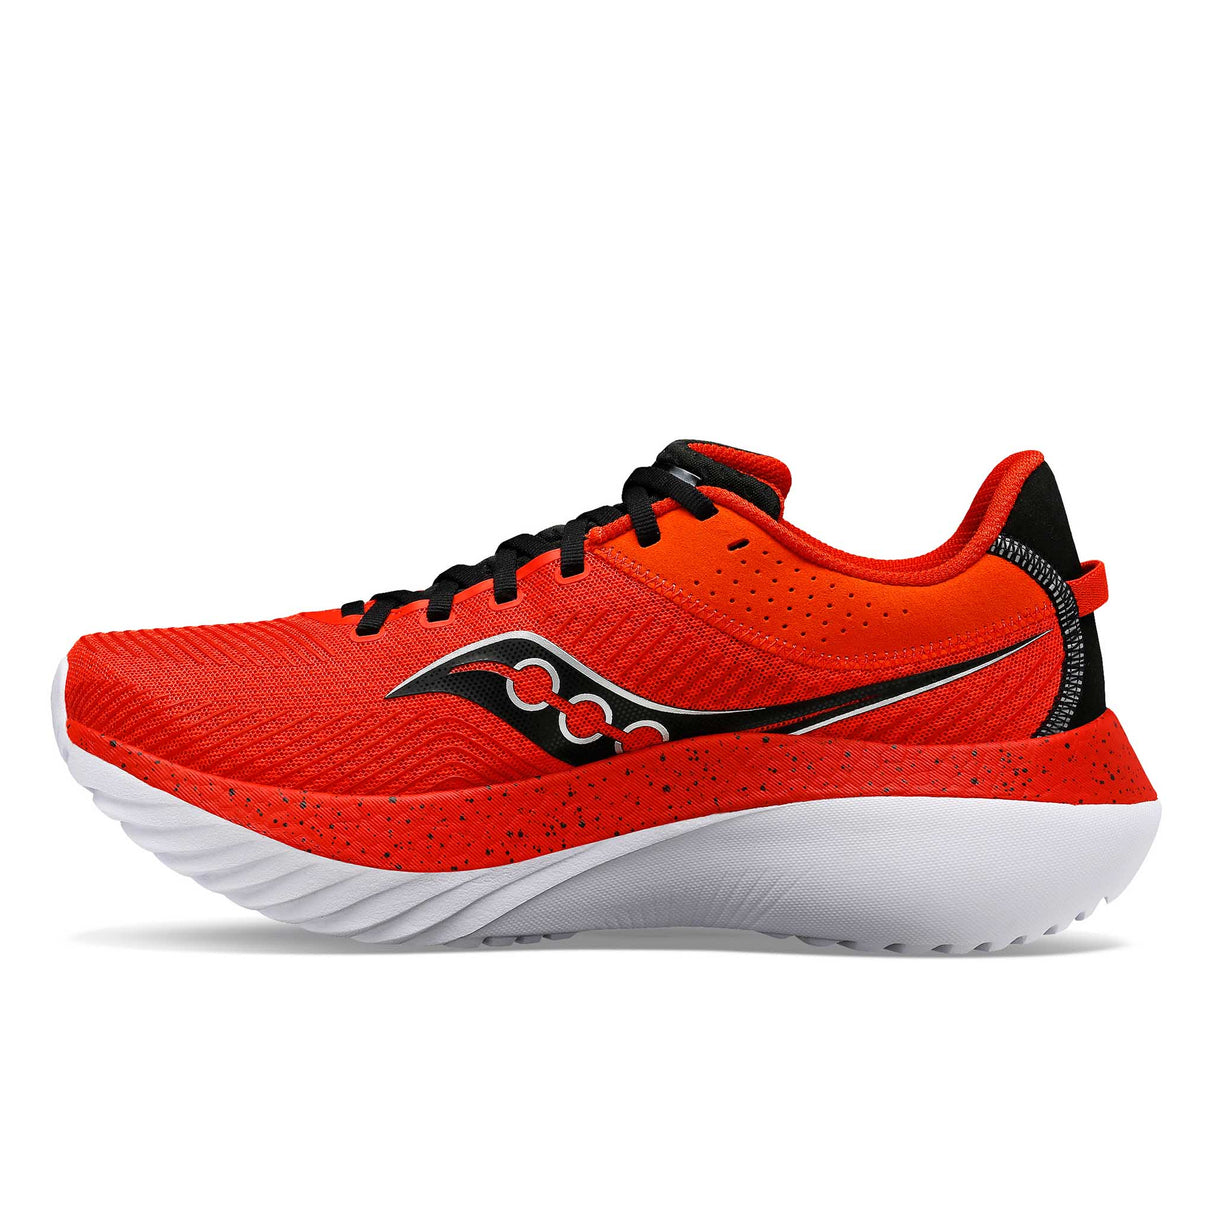 Saucony Kinvara Pro chaussures de course à pied homme lateral- infrared / black